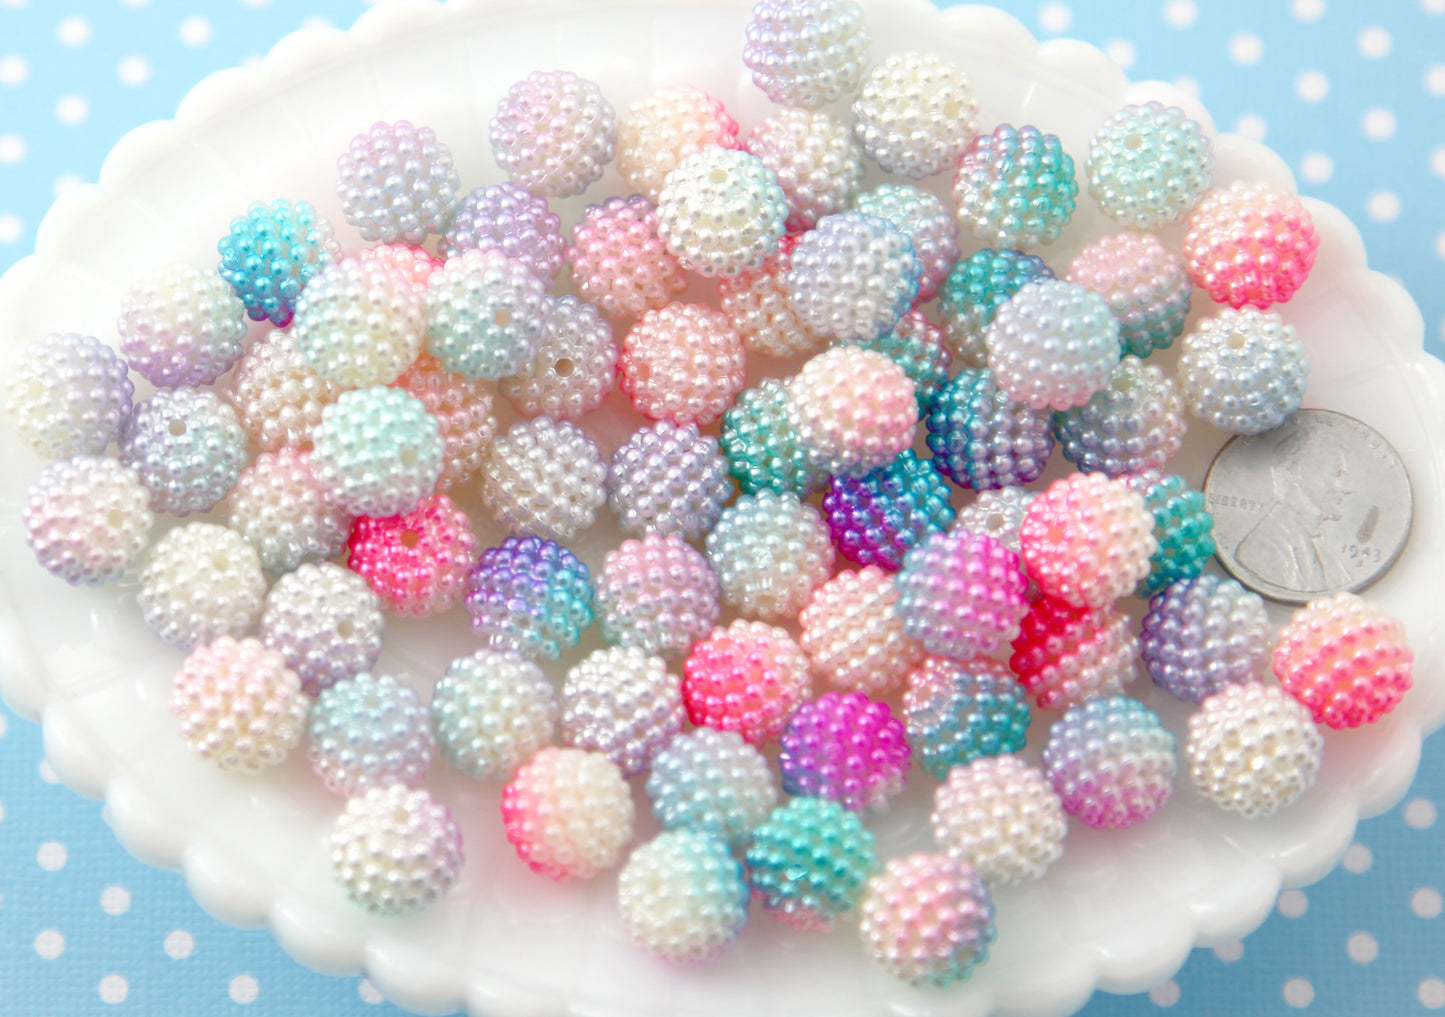 Berry Beads - 12mm Pastel Berry Beads Pearly Acrylic or Resin Beads - 50 pcs set